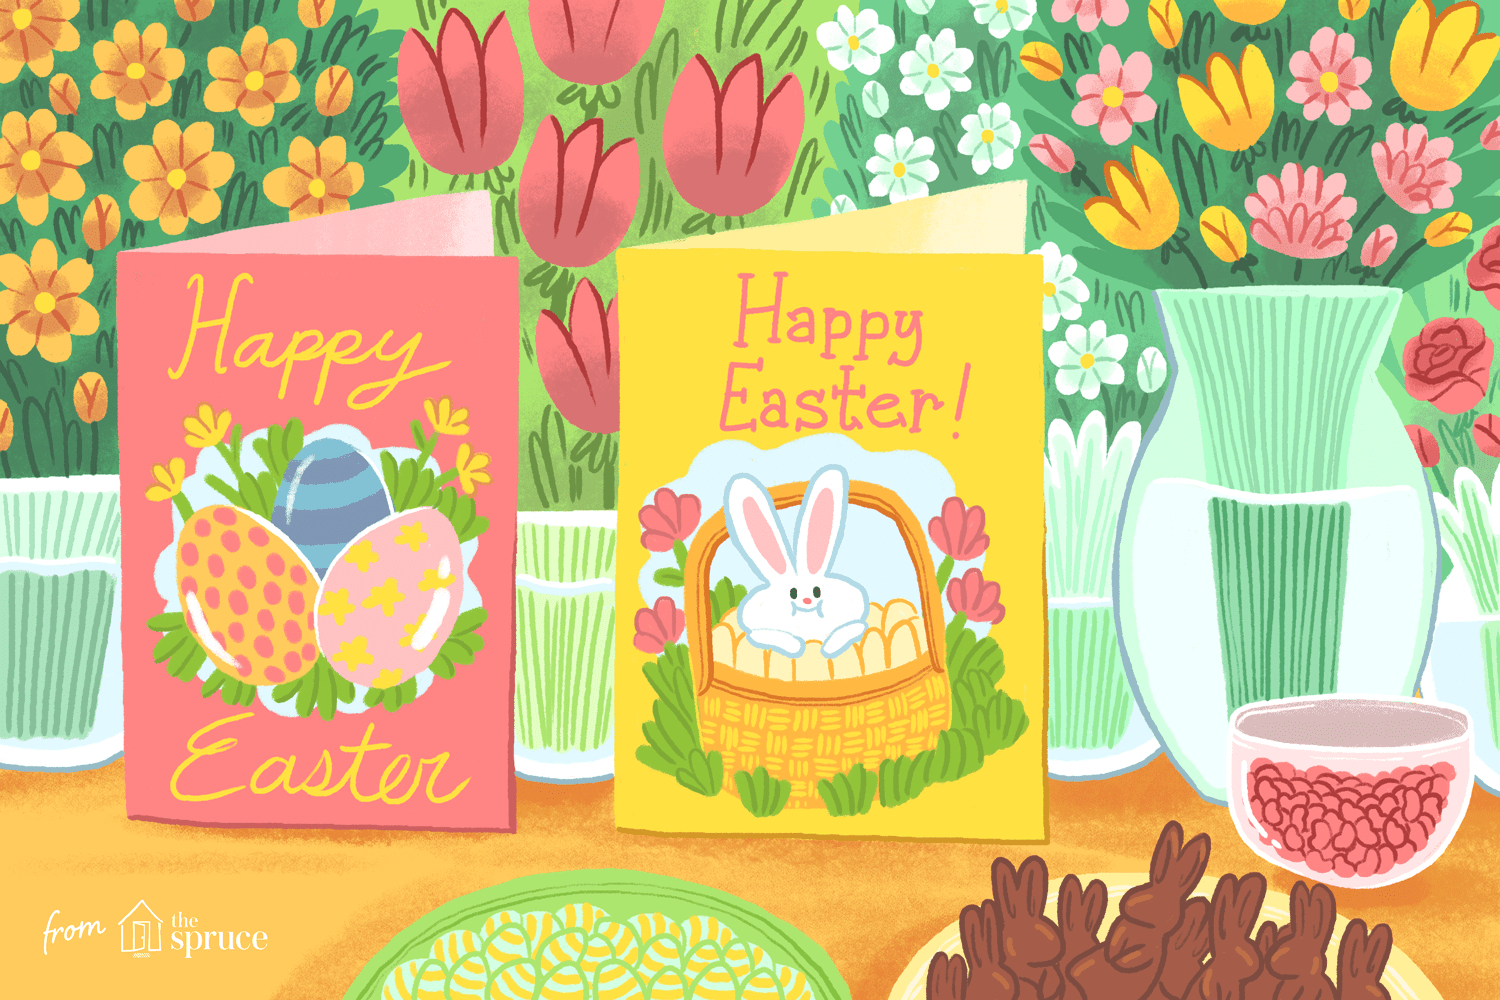 12 Free, Printable Easter Cards For Everyone You Know - Free Printable Easter Greeting Cards